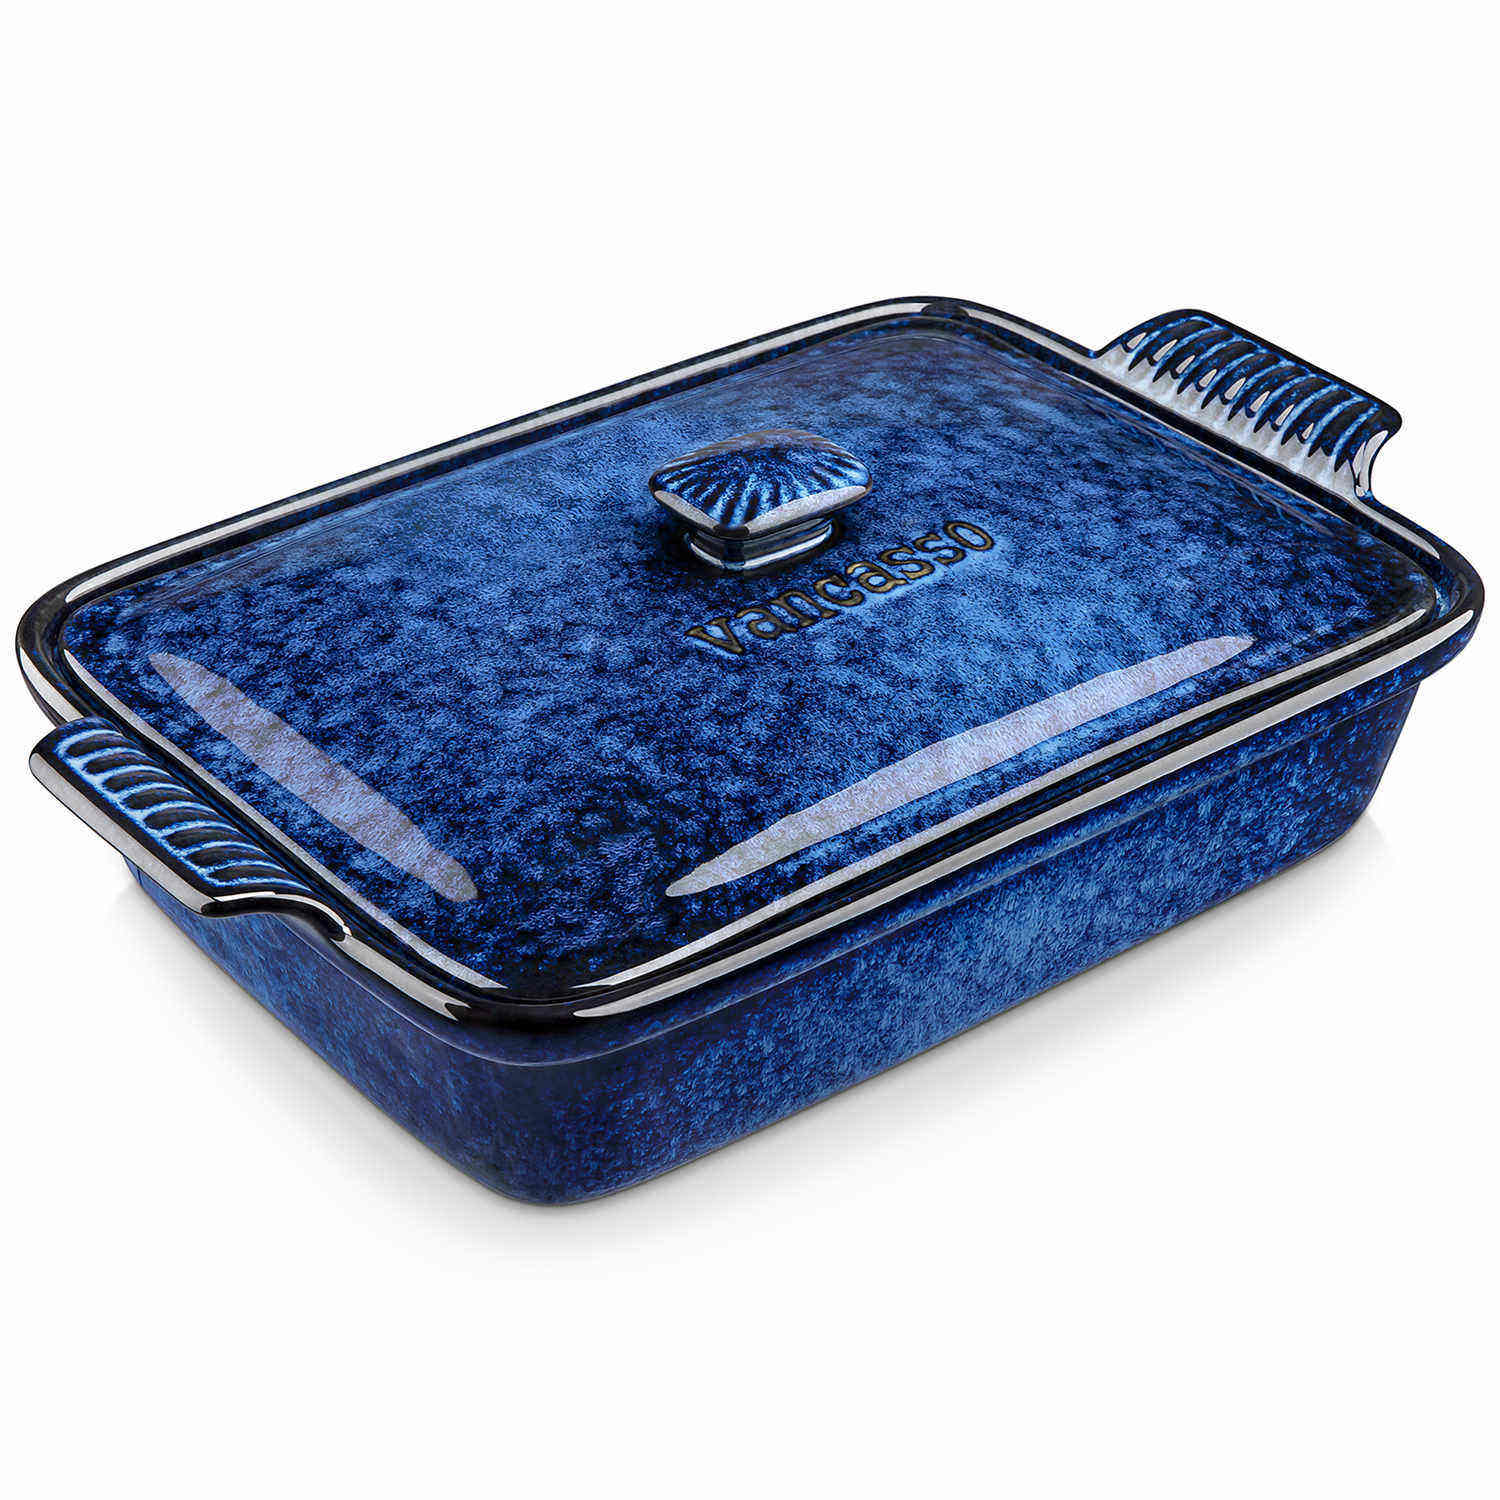 Starry Casserole With Lid 3.8QT